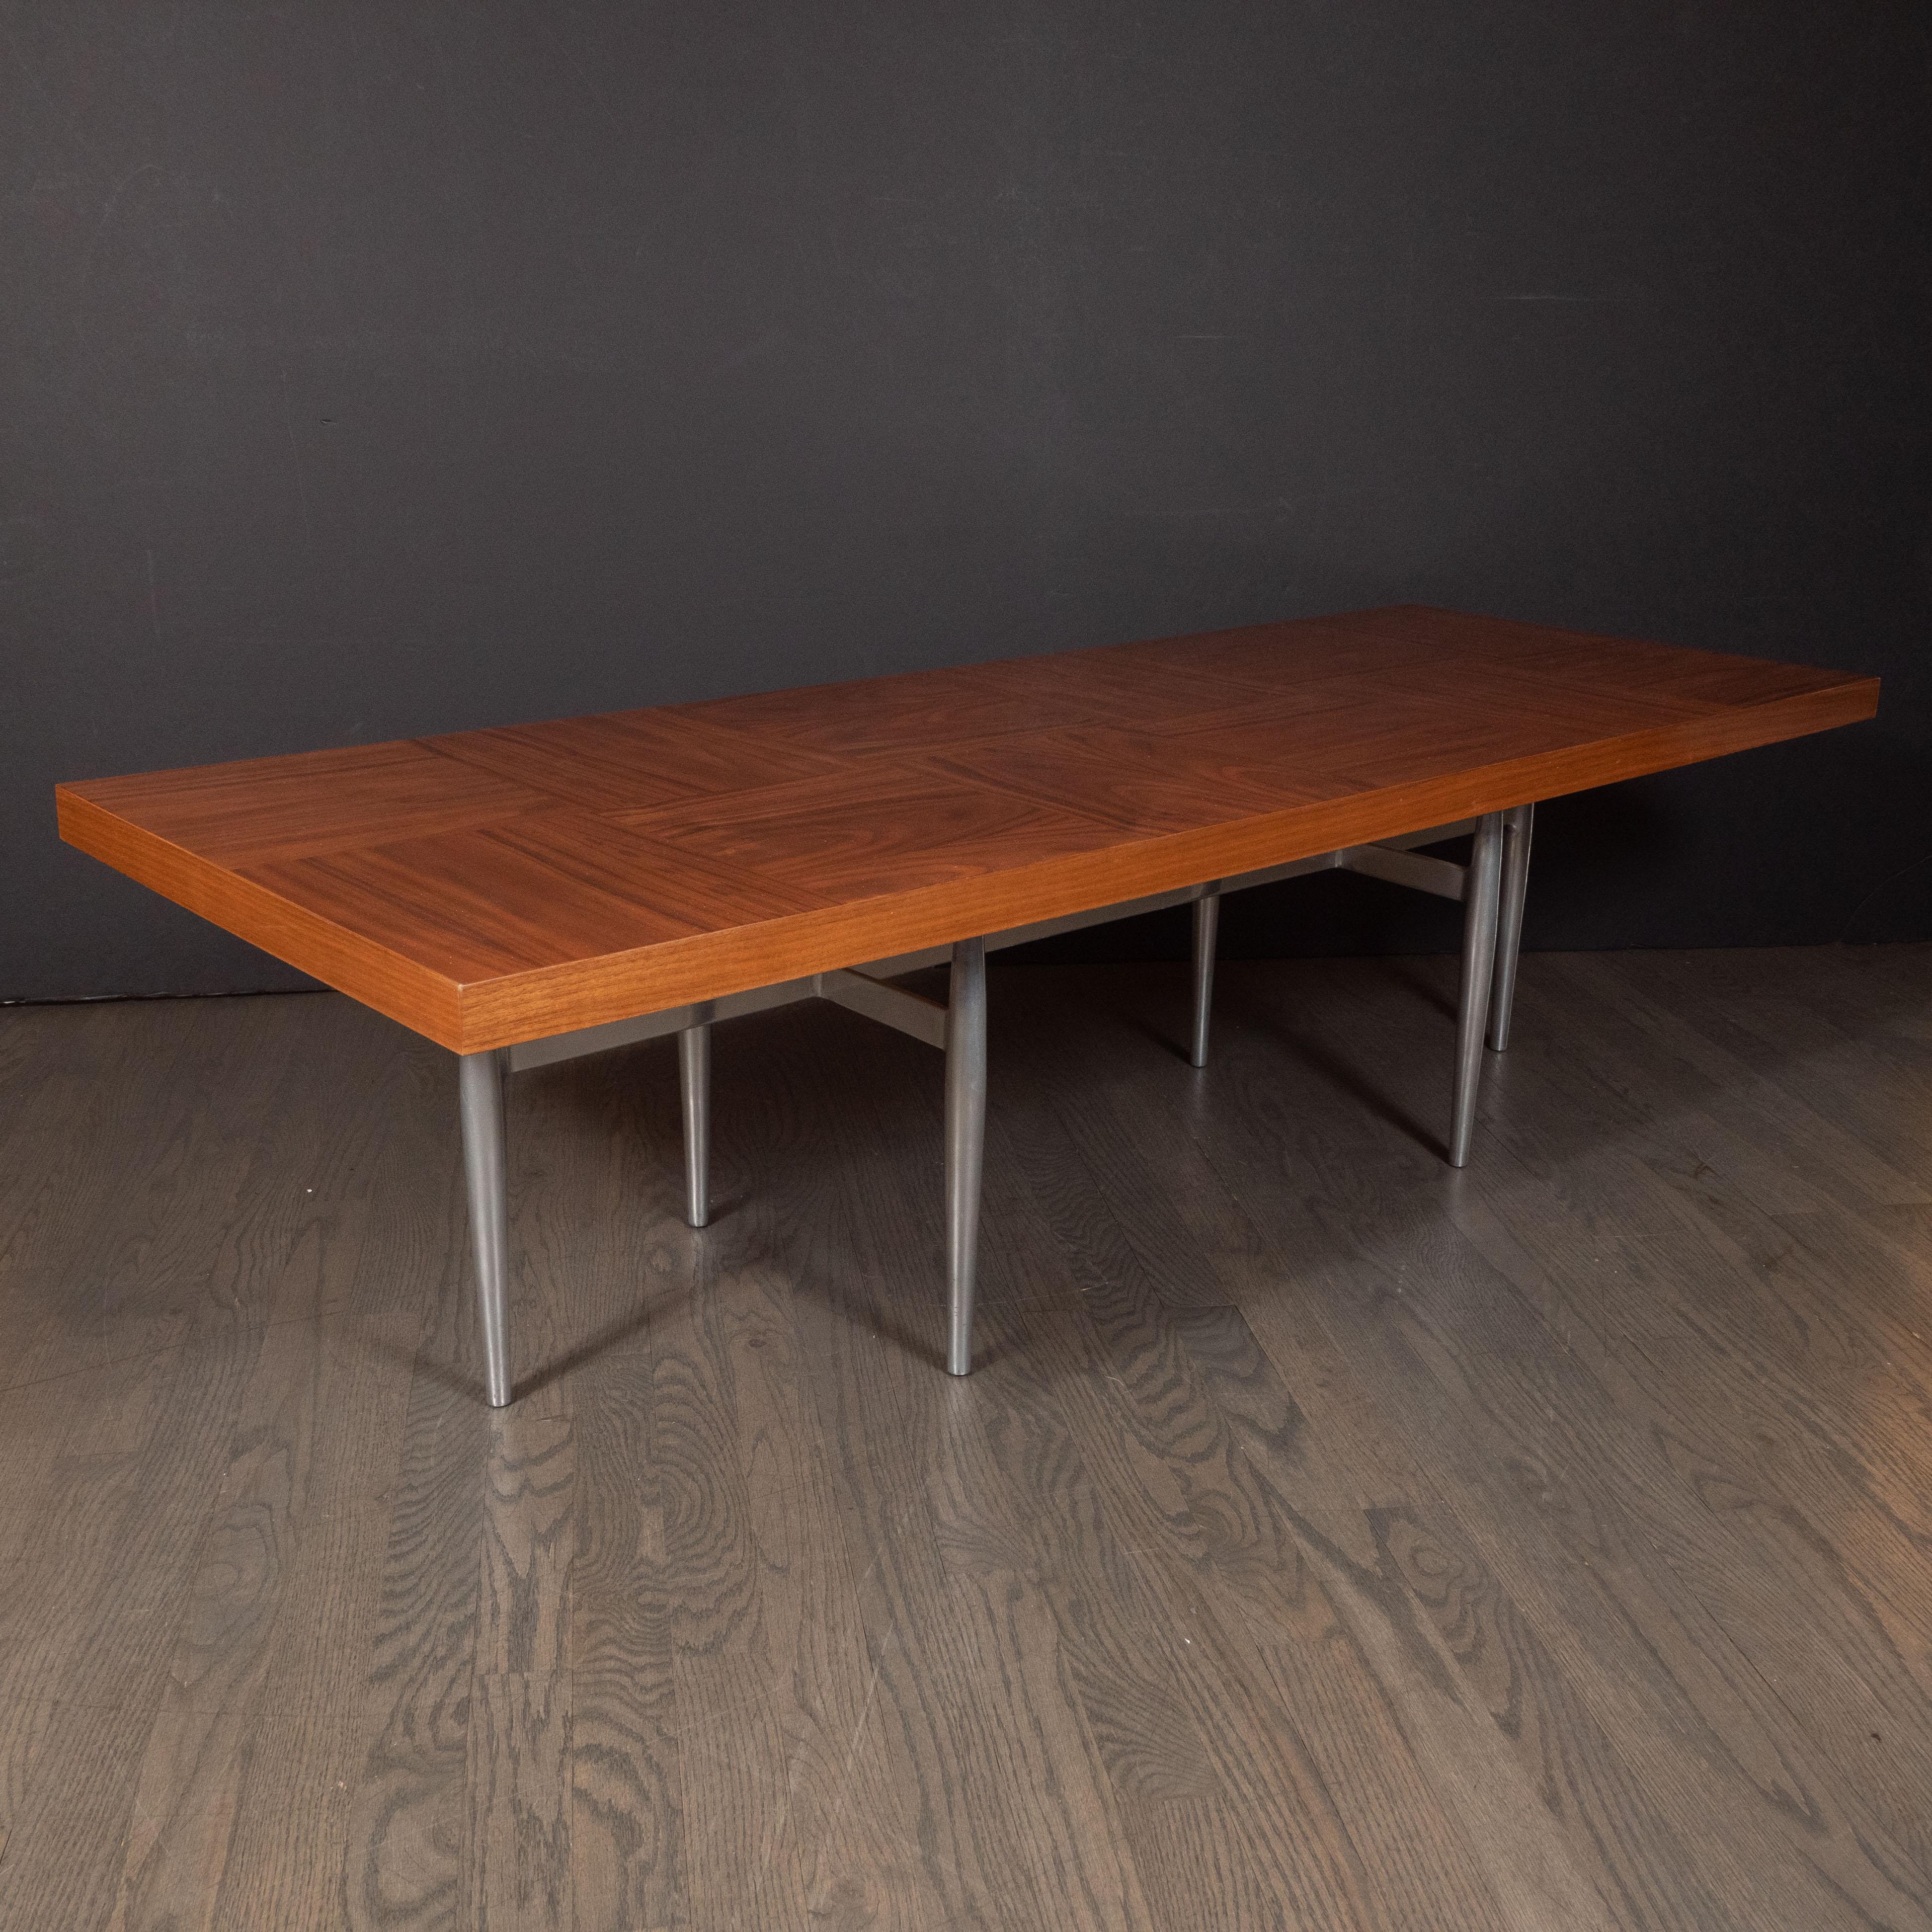 This stunning cocktail table was realized in the United States, circa 1960. It features a sculptural base consisting of six legs with tapered ends connected via rectangular supports all in brushed aluminum. A rectangular bookmatched walnut top- with